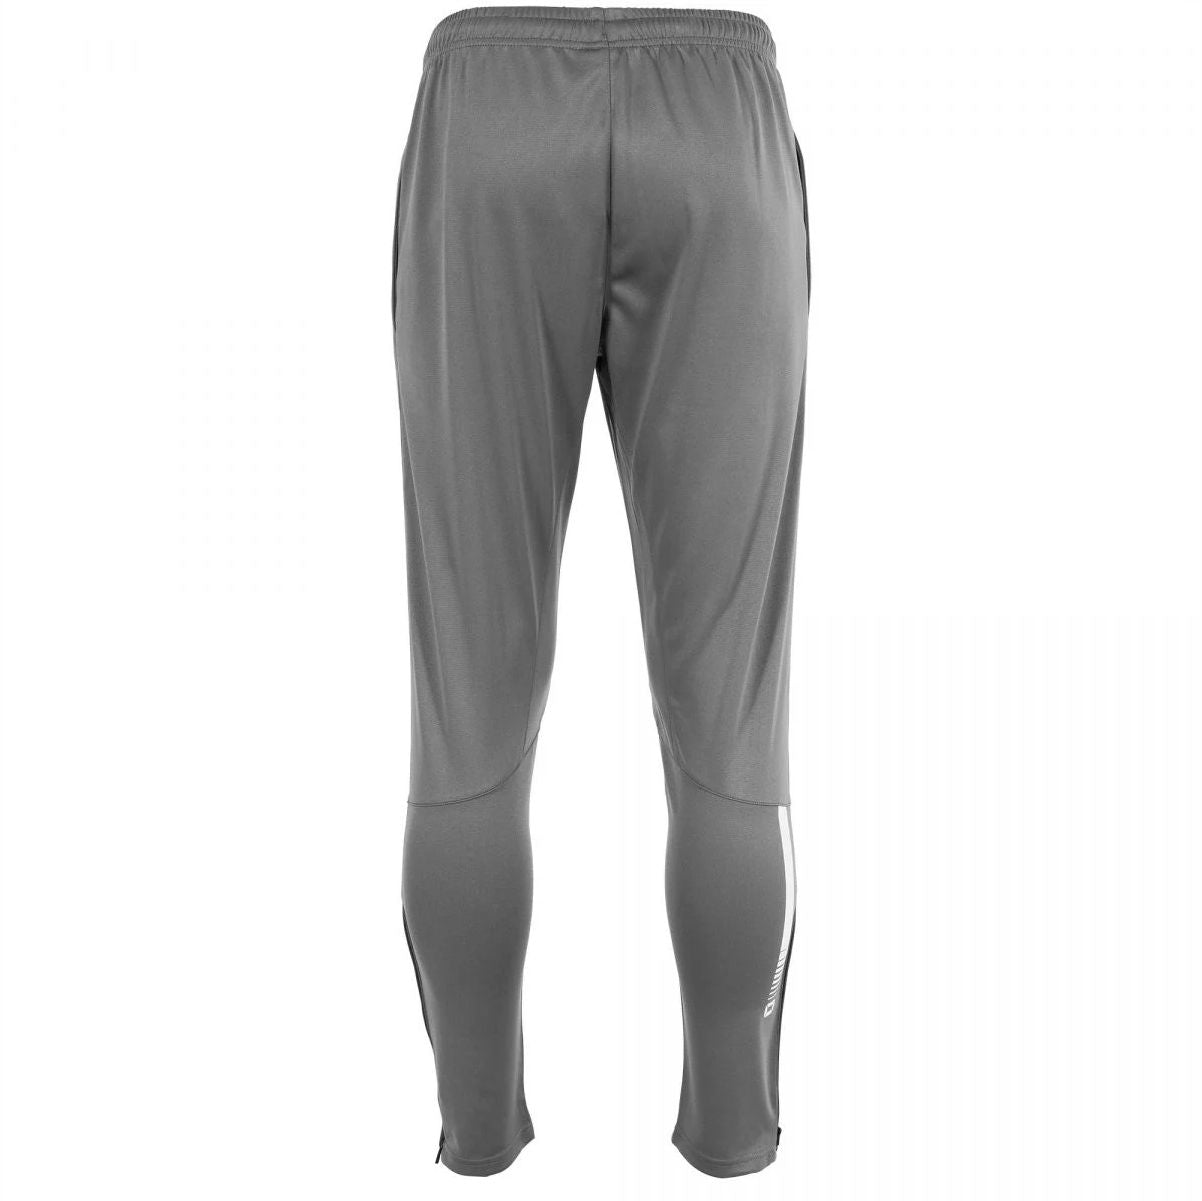 Stanno - First Pants - Grey - Junior